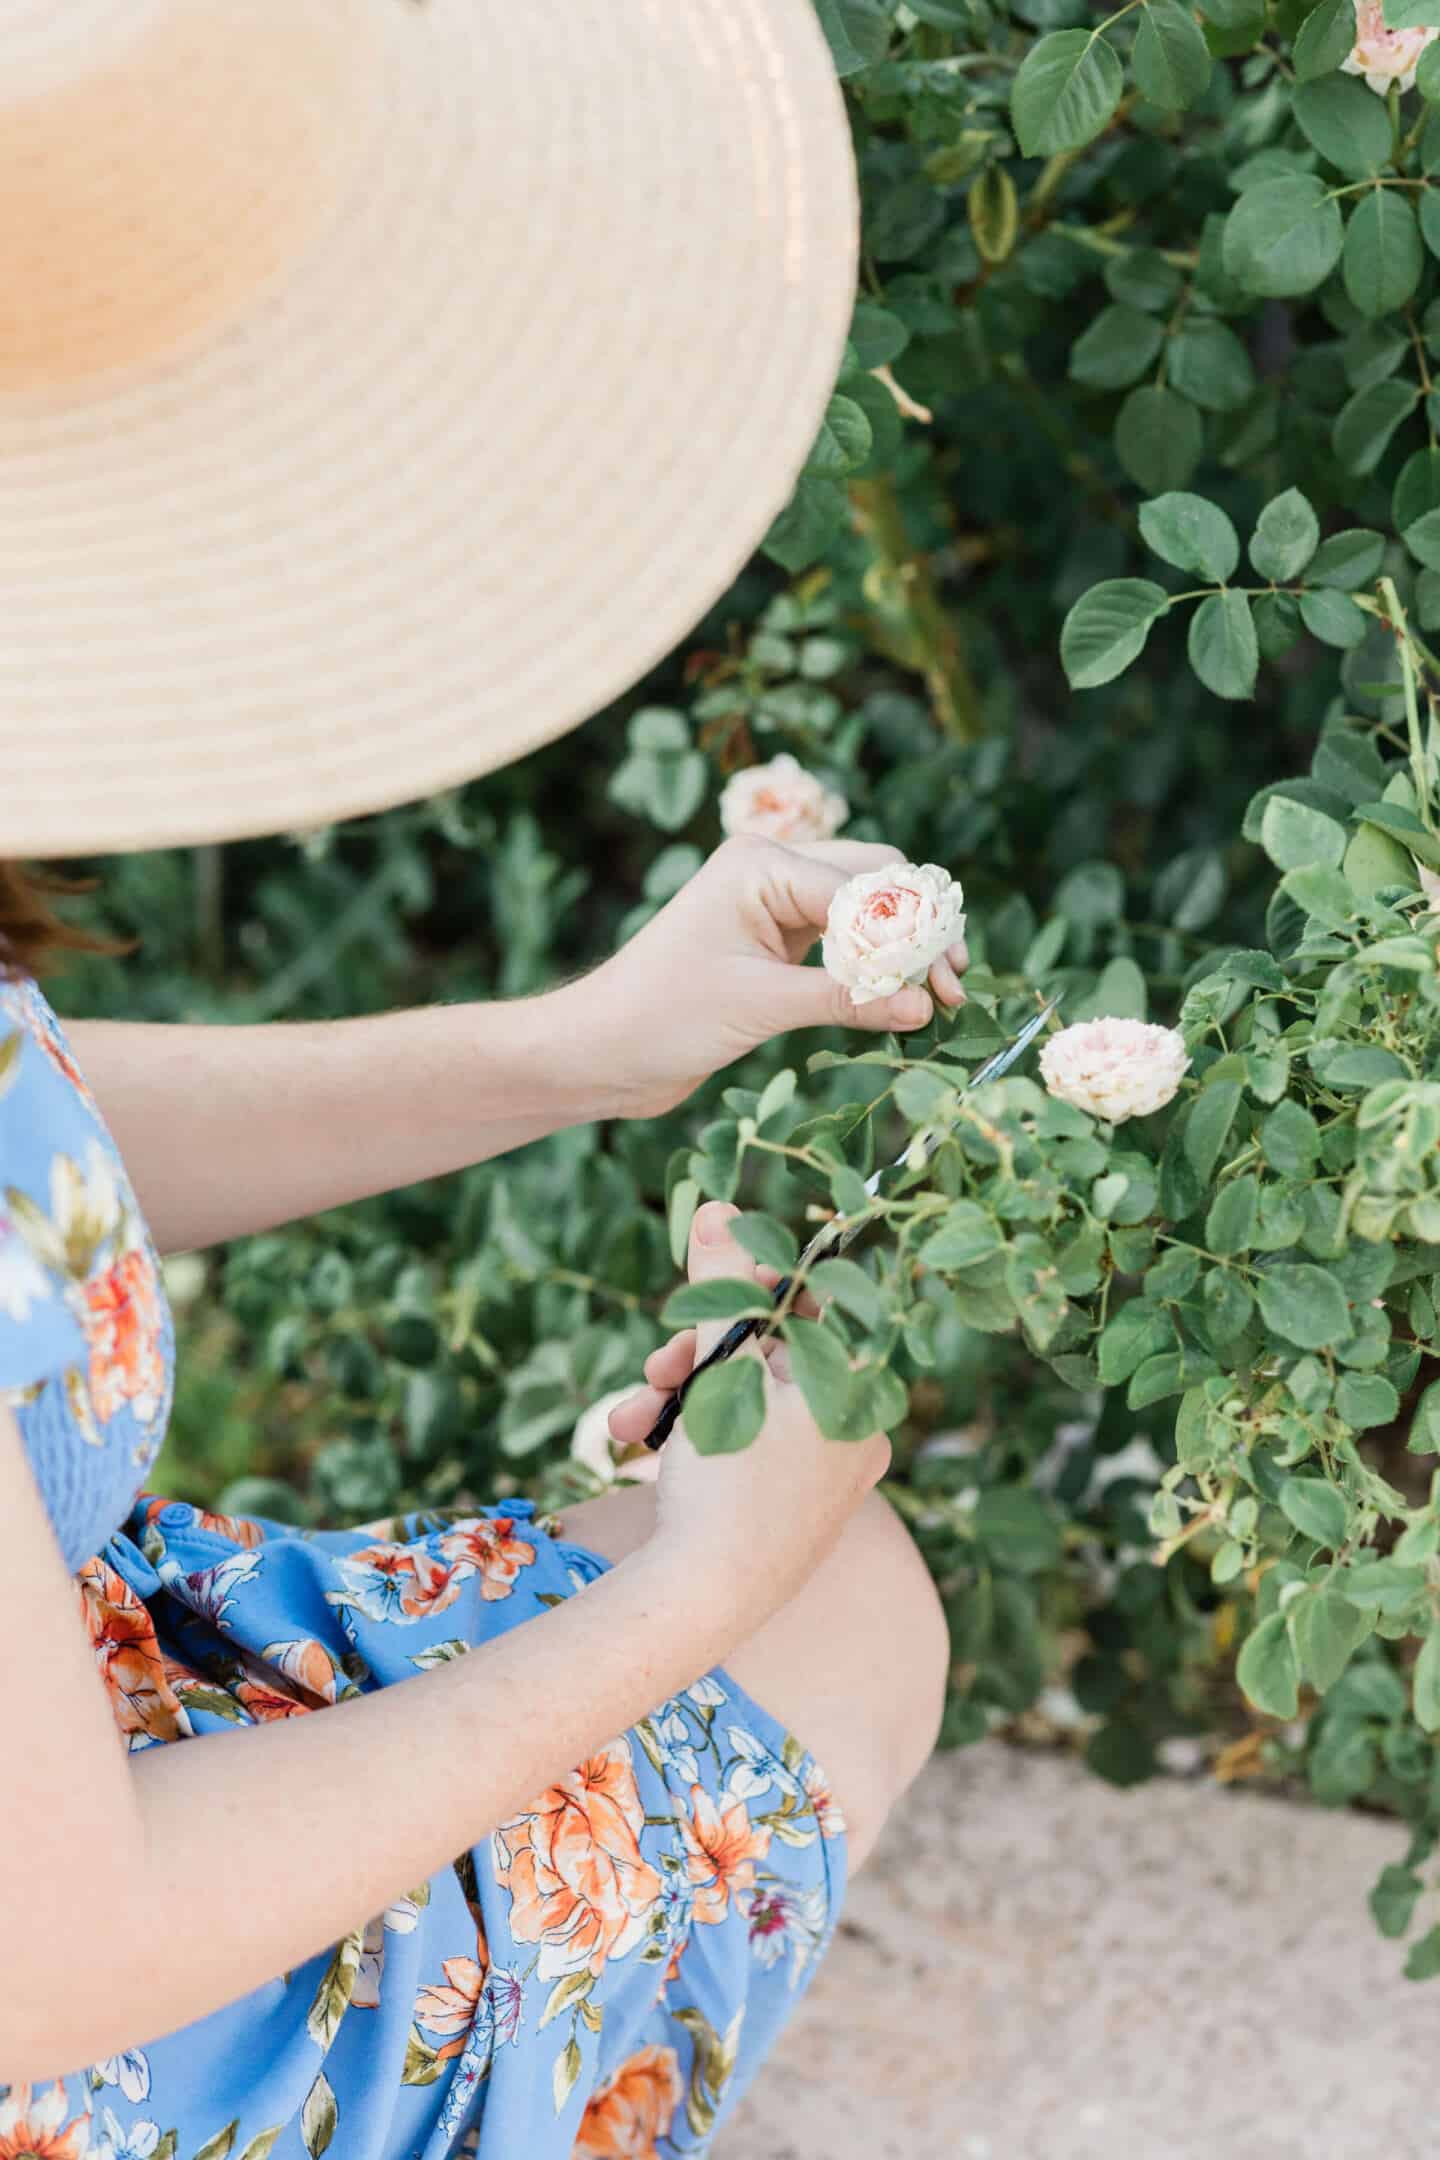 A woman in a floaty blue dress and straw hat prunning white roses in the garden